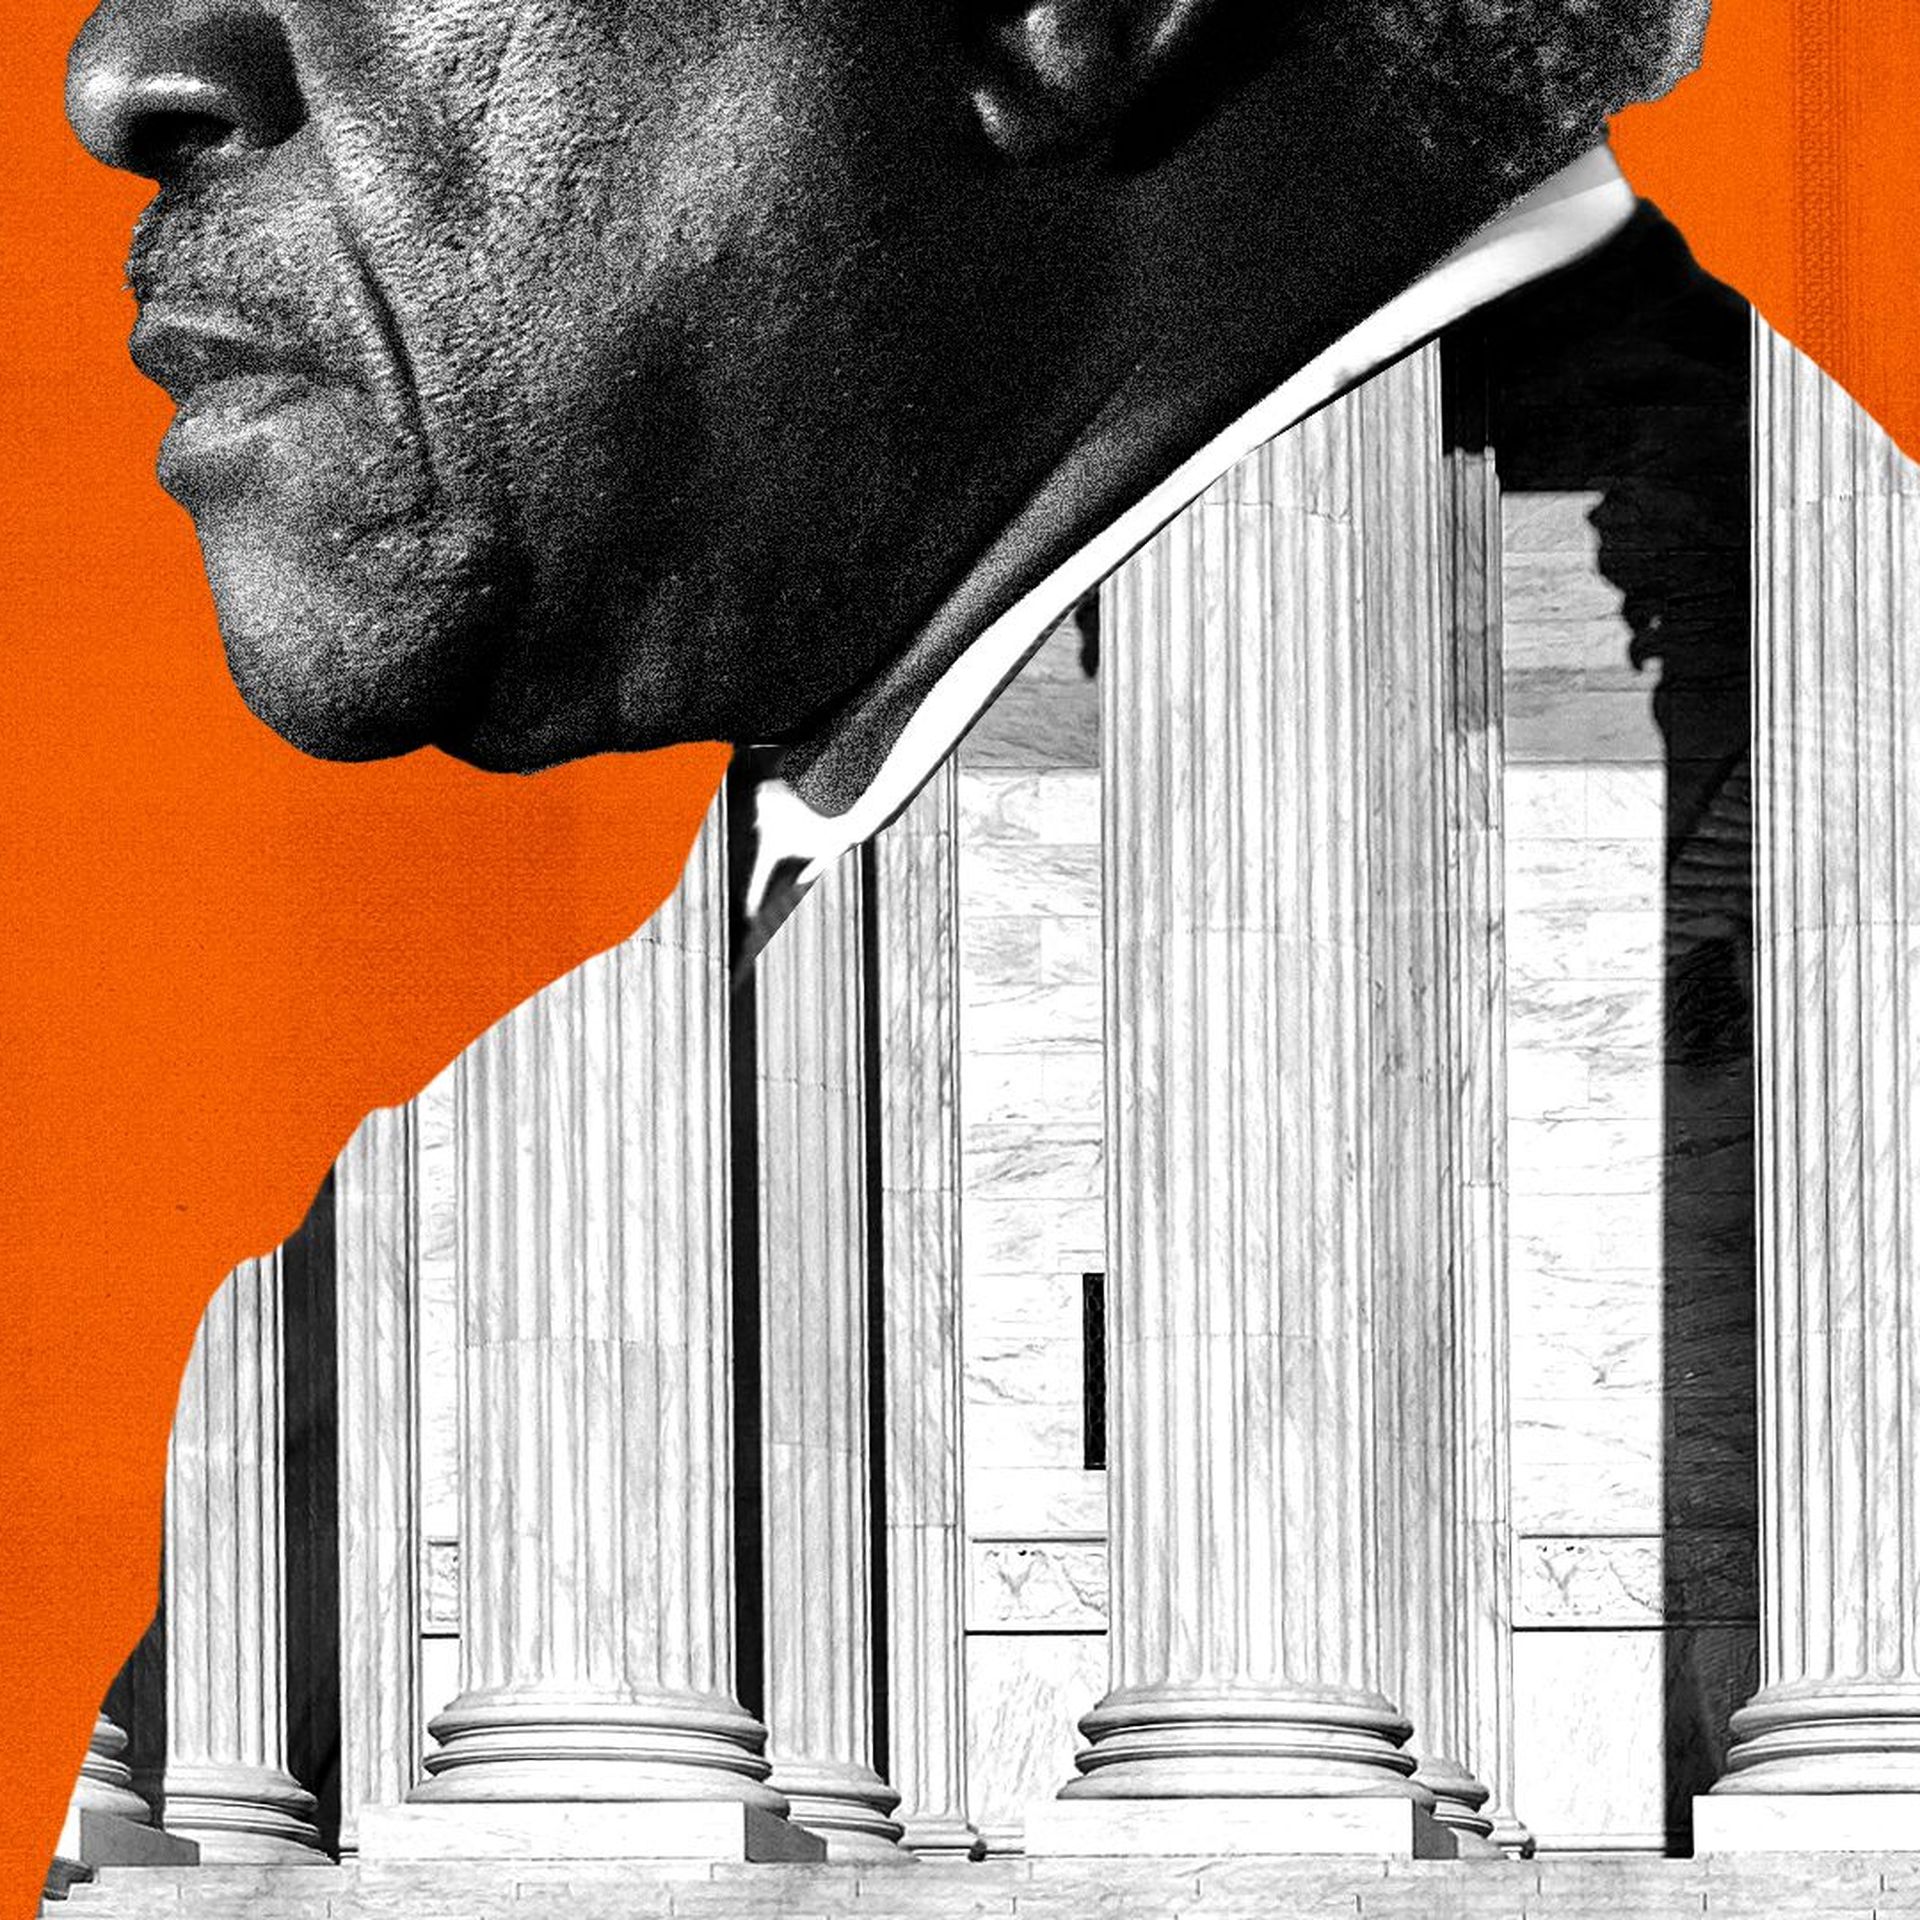 Photo illustration of Justice Clarence Thomas with the Supreme Court forming his judge's robes. 